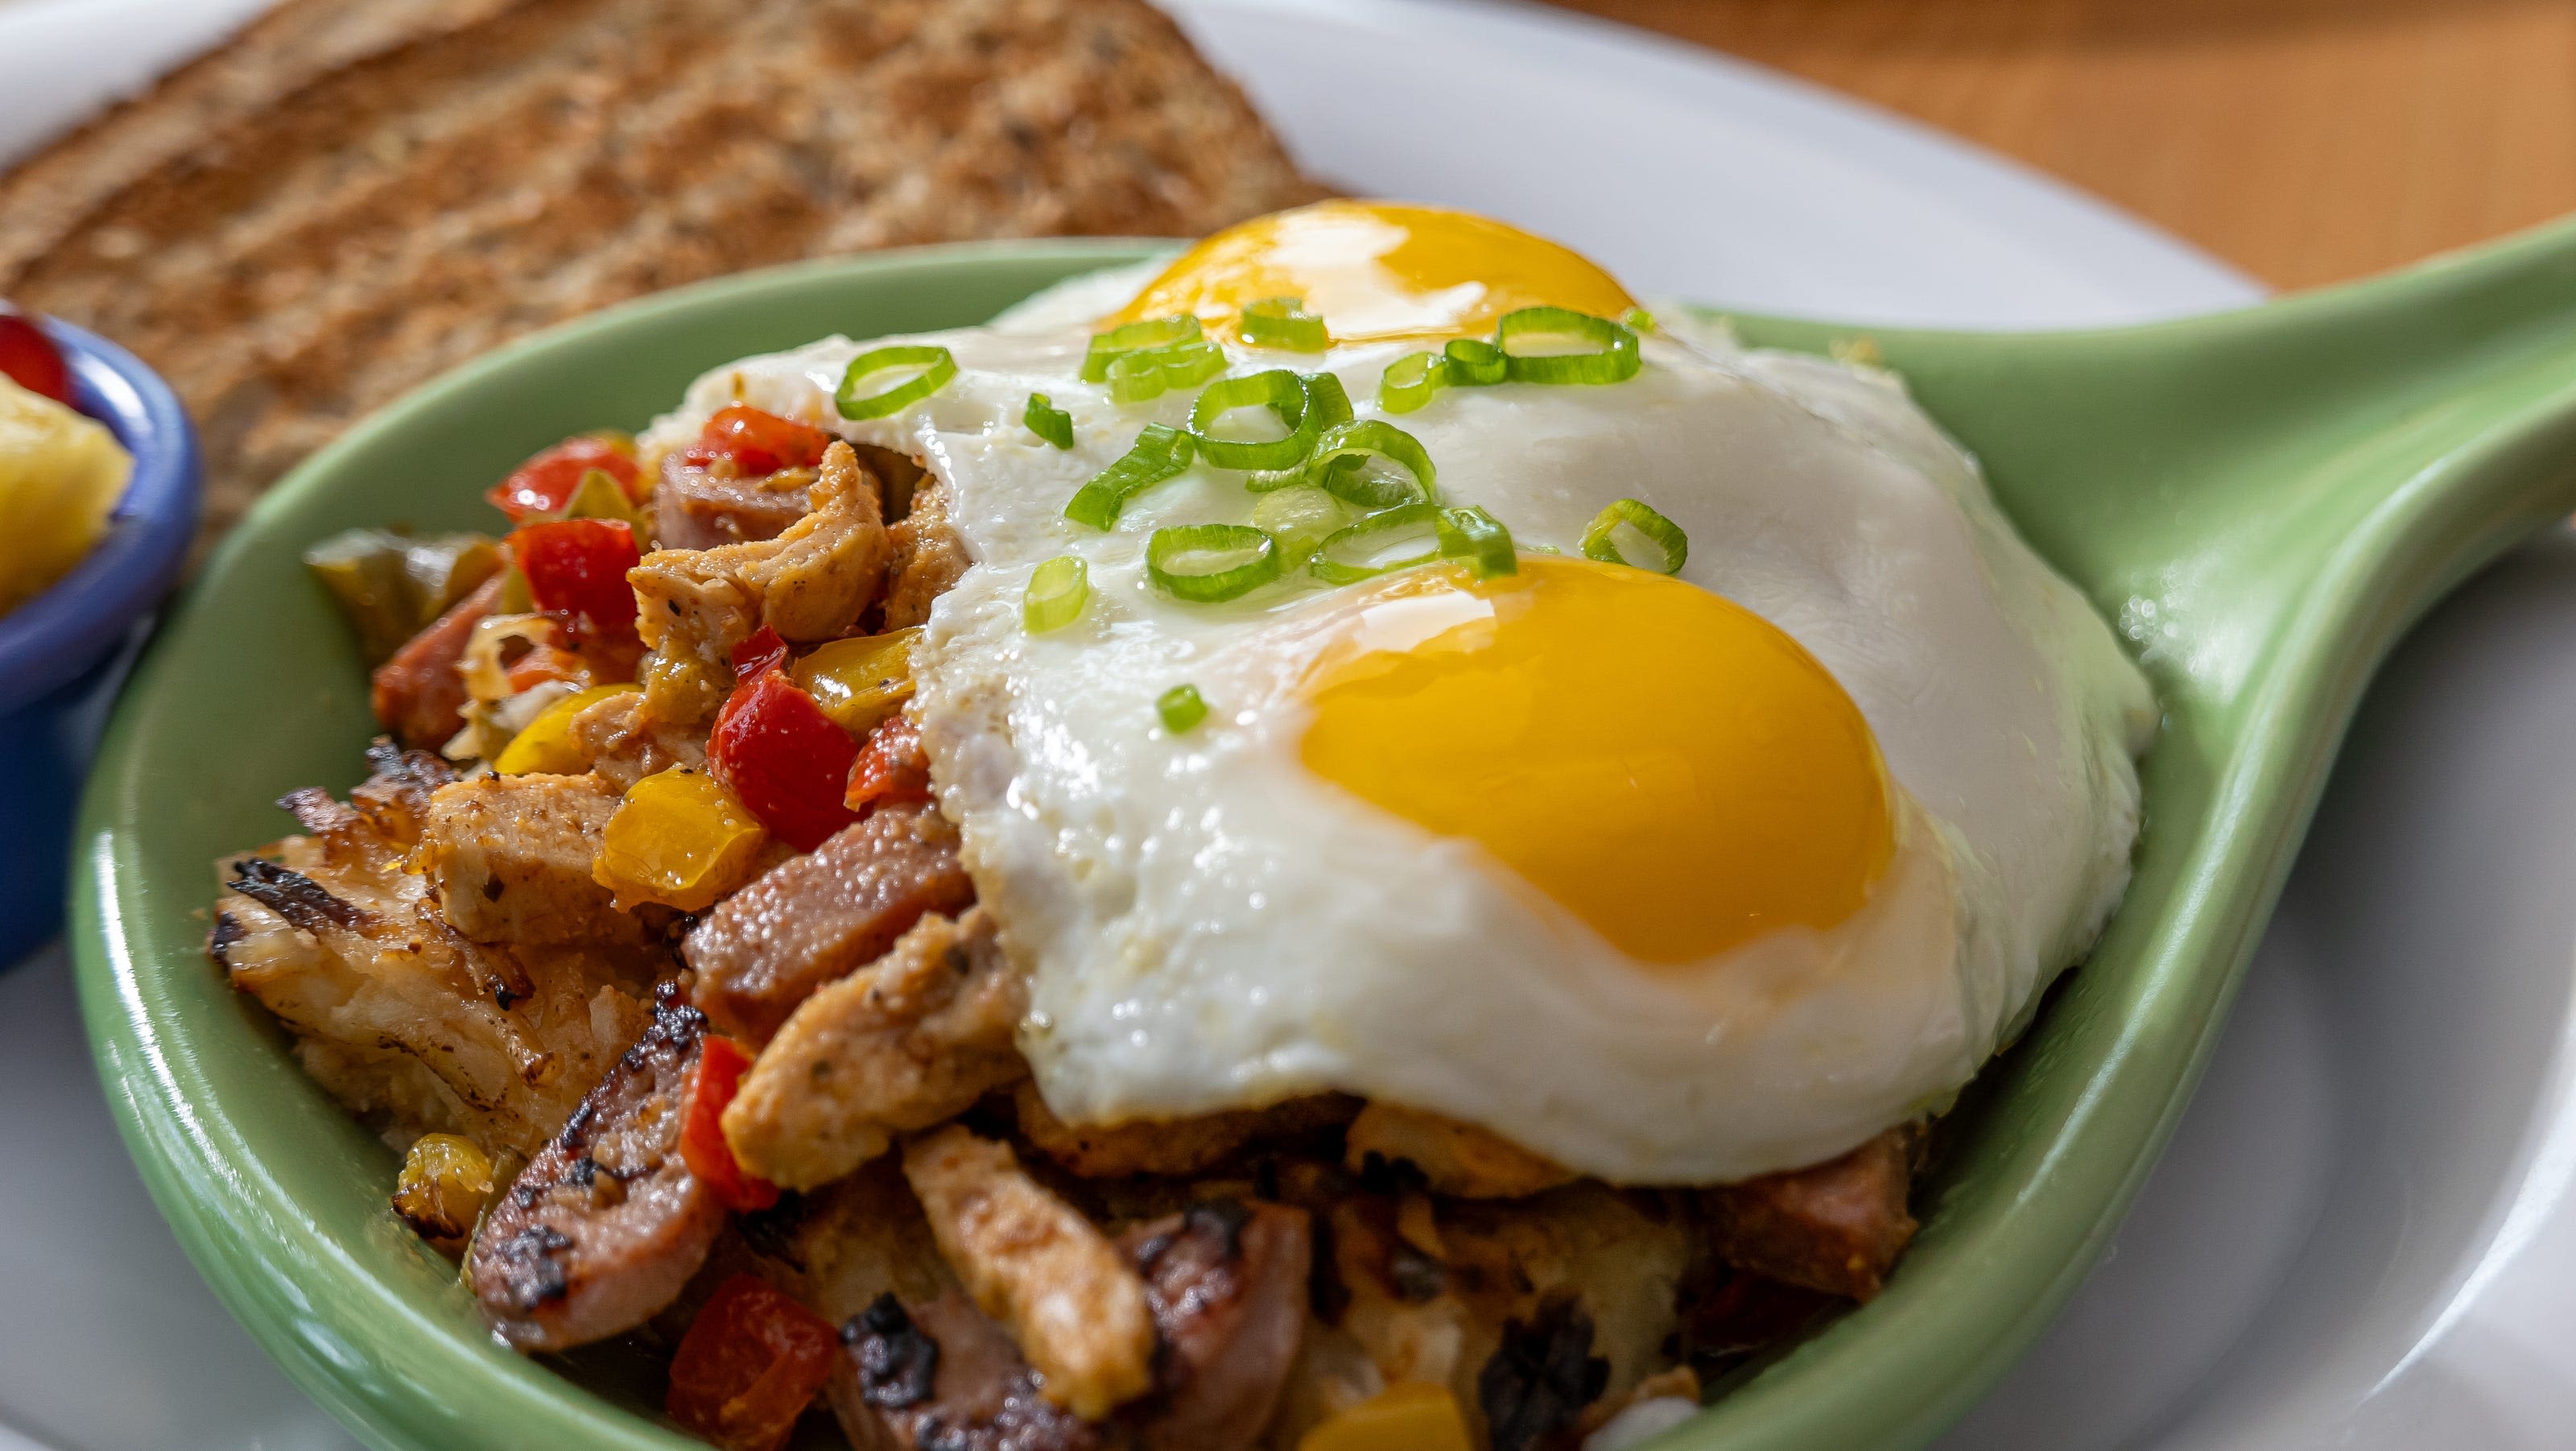 Skillets brings its breakfast-from-scratch menu to third location in Palm Beach County